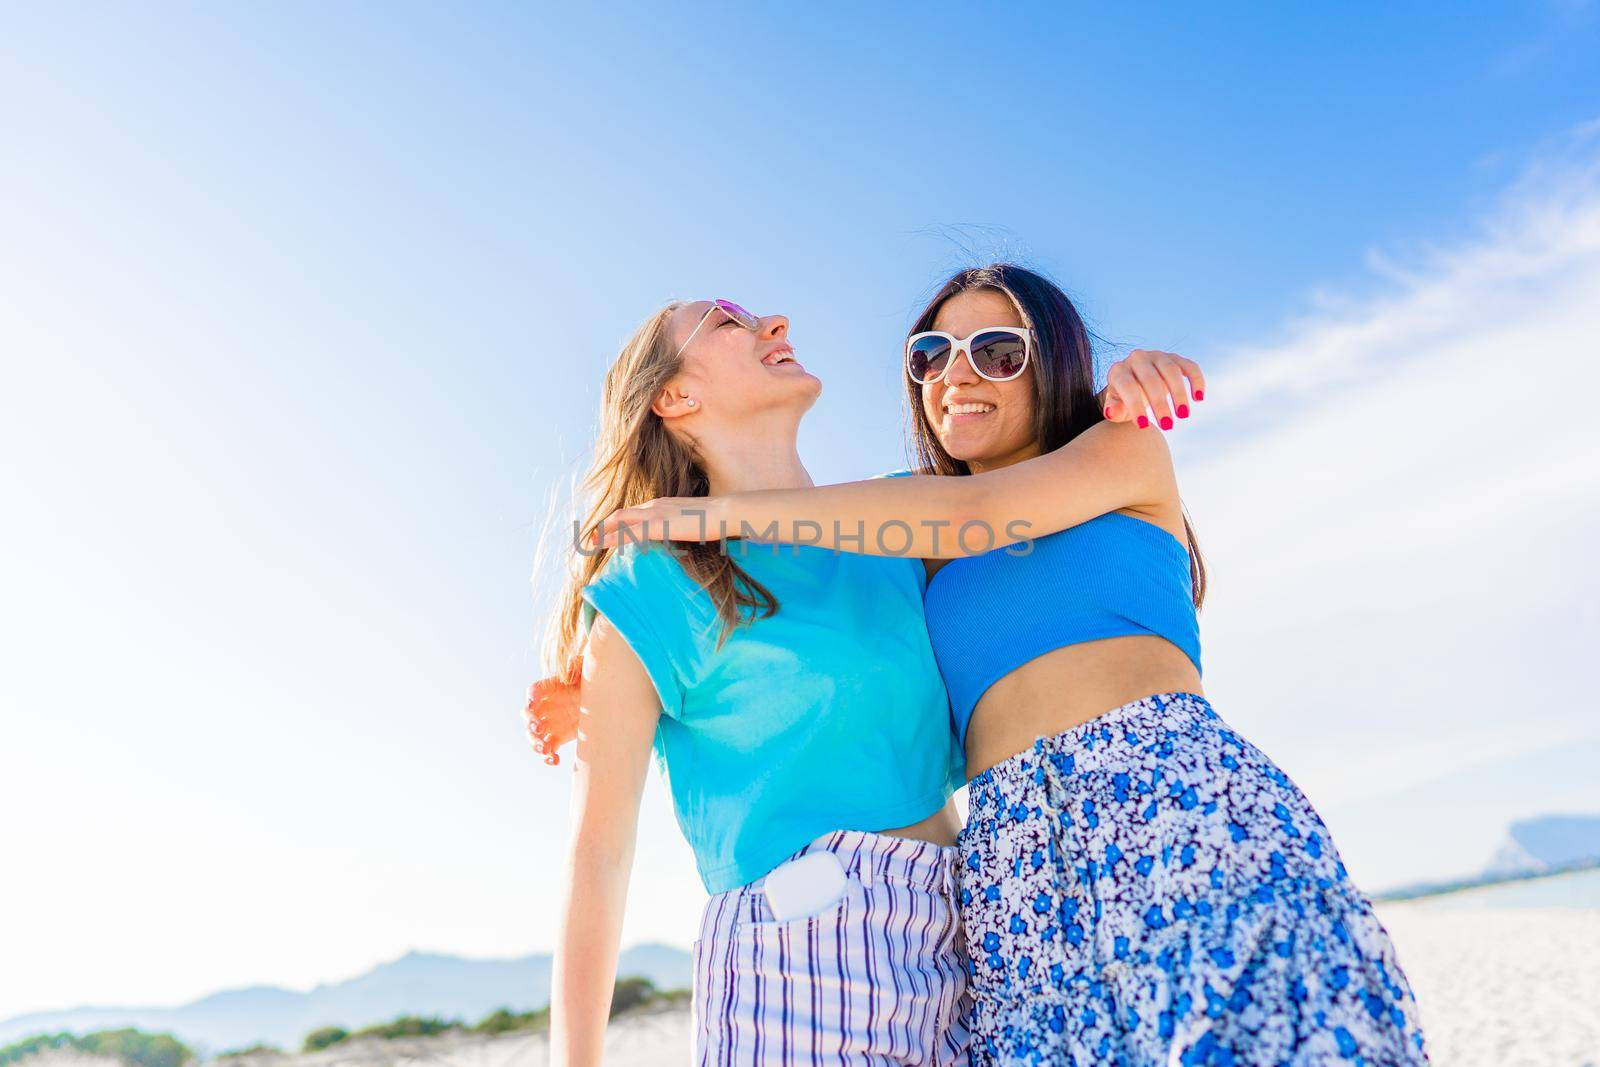 Bottom view of girls couple embracing laughing enjoying life on vacations at sea ocean tropical resort. Glamour photography of two 20s young women hugging on beach in summer travel. Happiness concept by robbyfontanesi